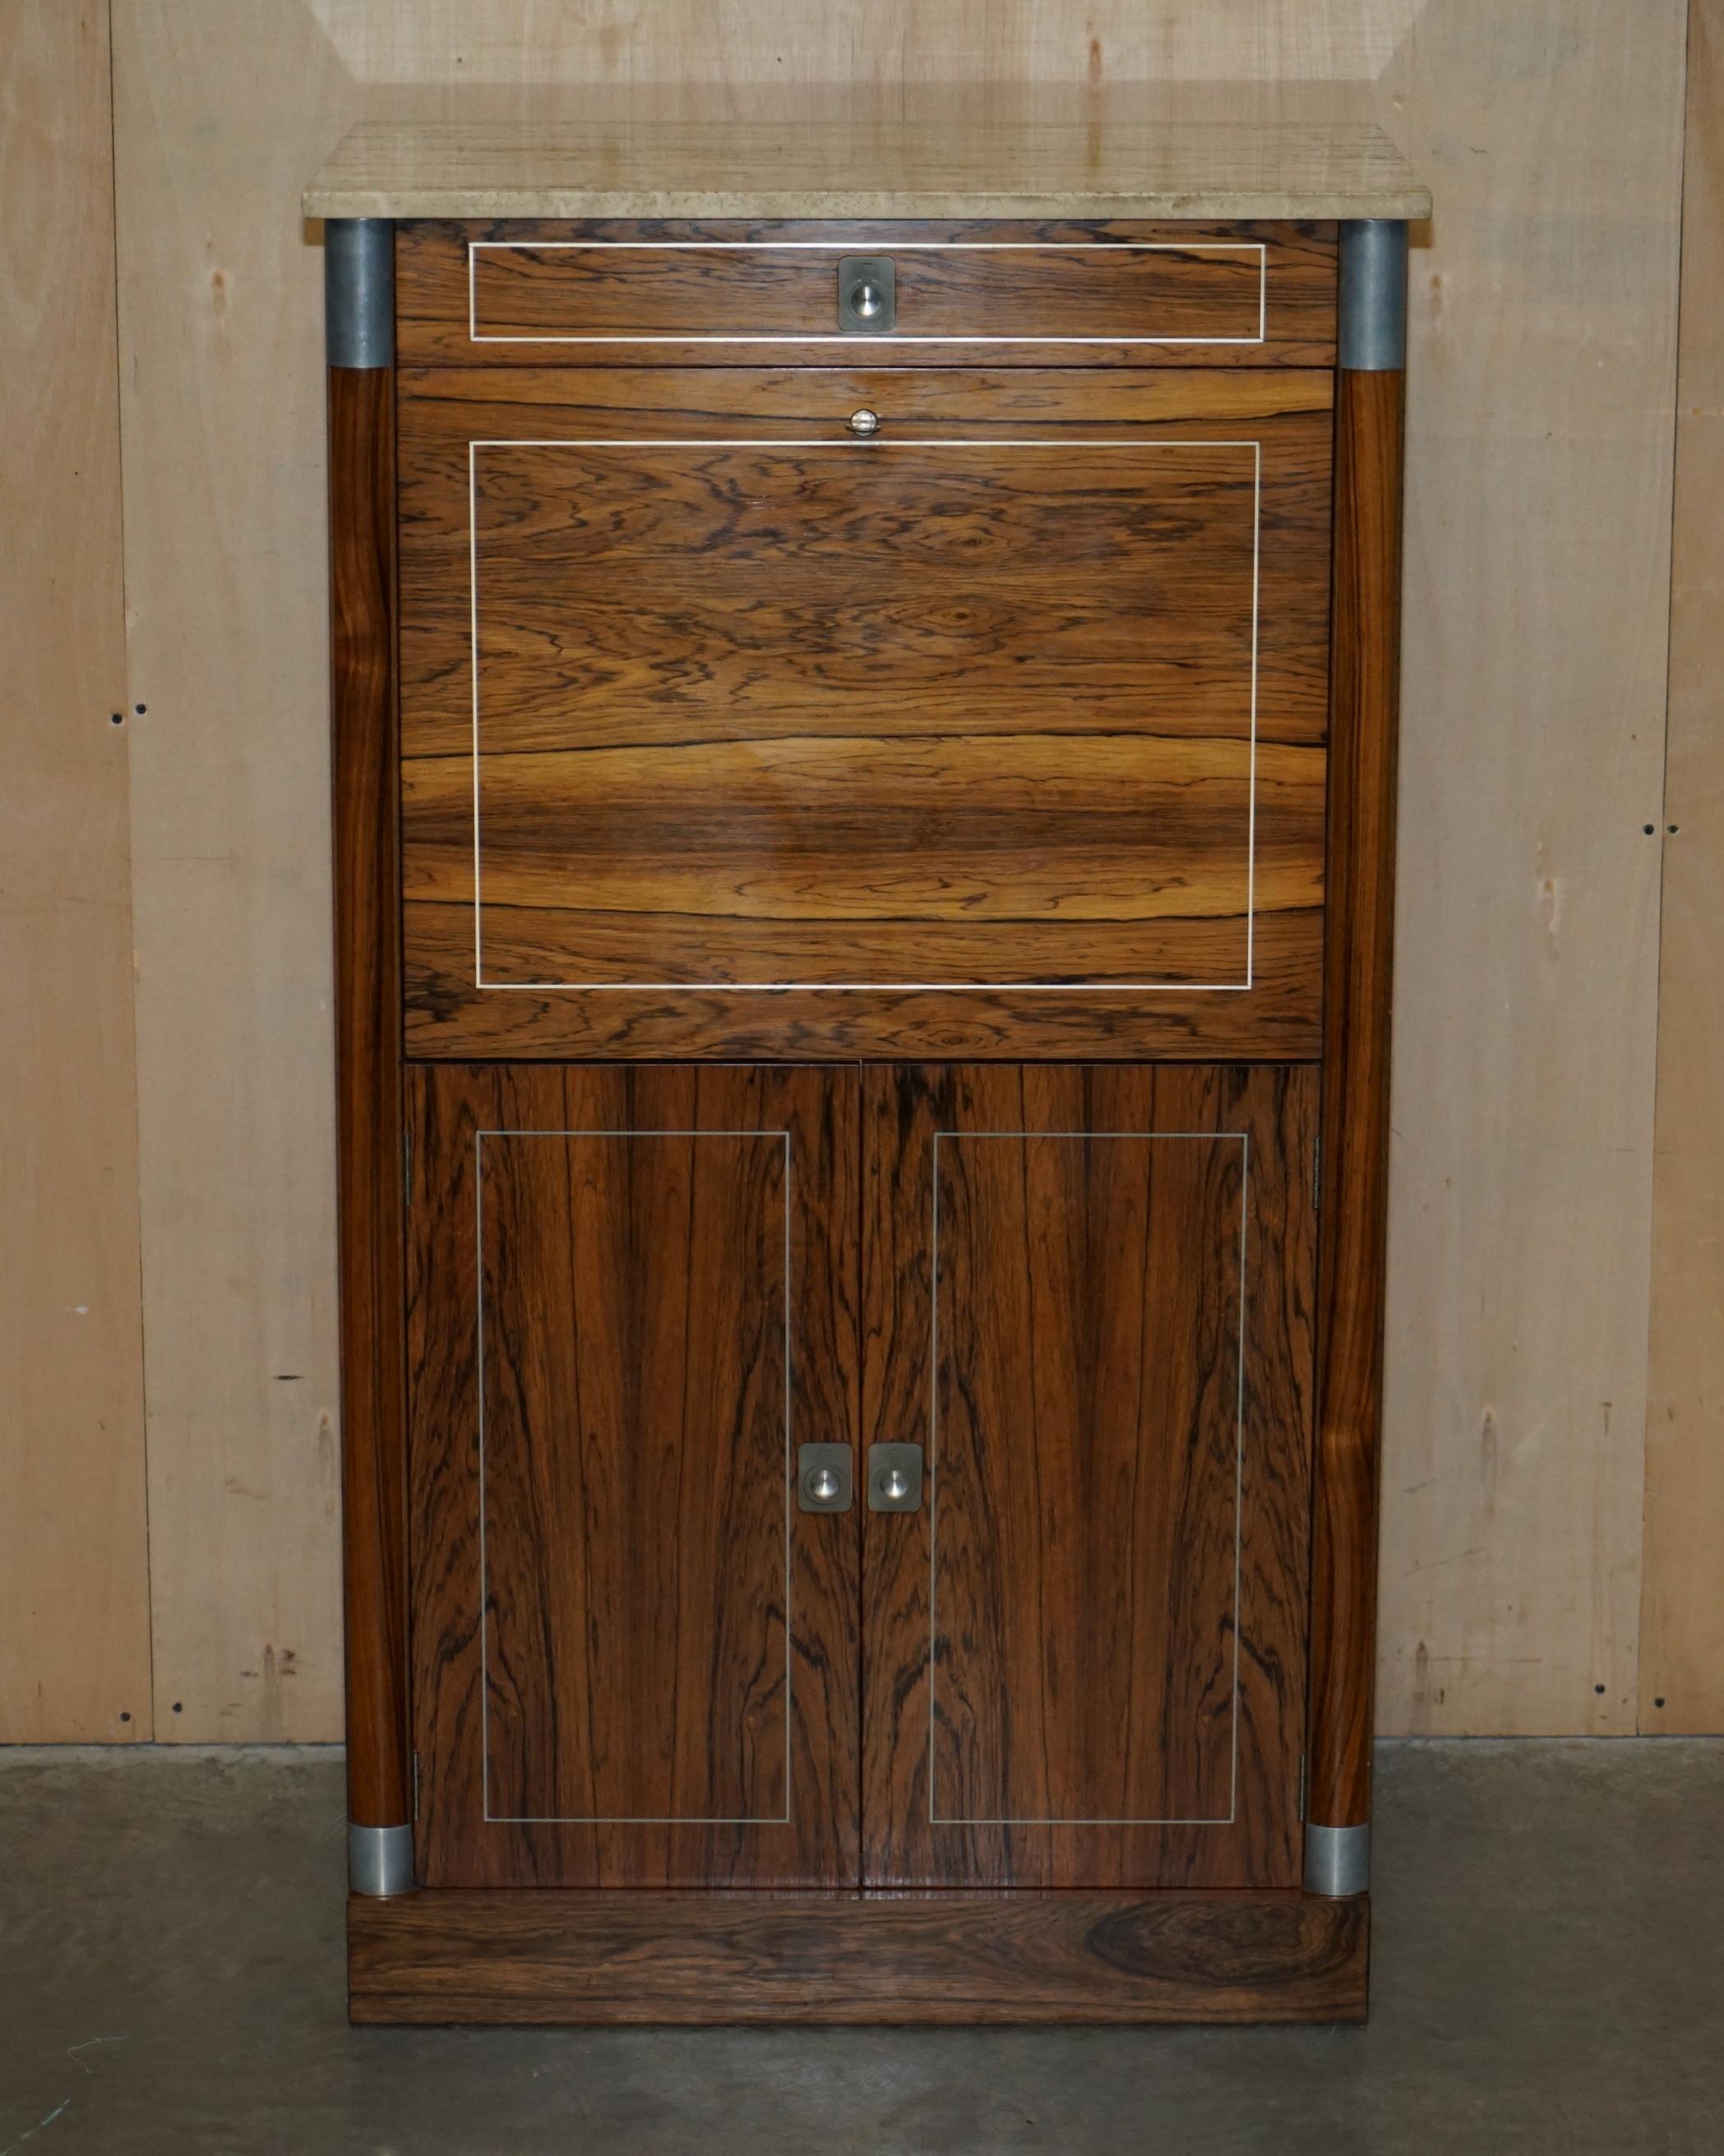 We are delighted to offer for sale this exquisite, tall, Rosewood with marble top and chrome fittings free standing Secratire desk 

A truly stunning desk, its very large and yet doesn't take up much floor space as it is large going up, you can